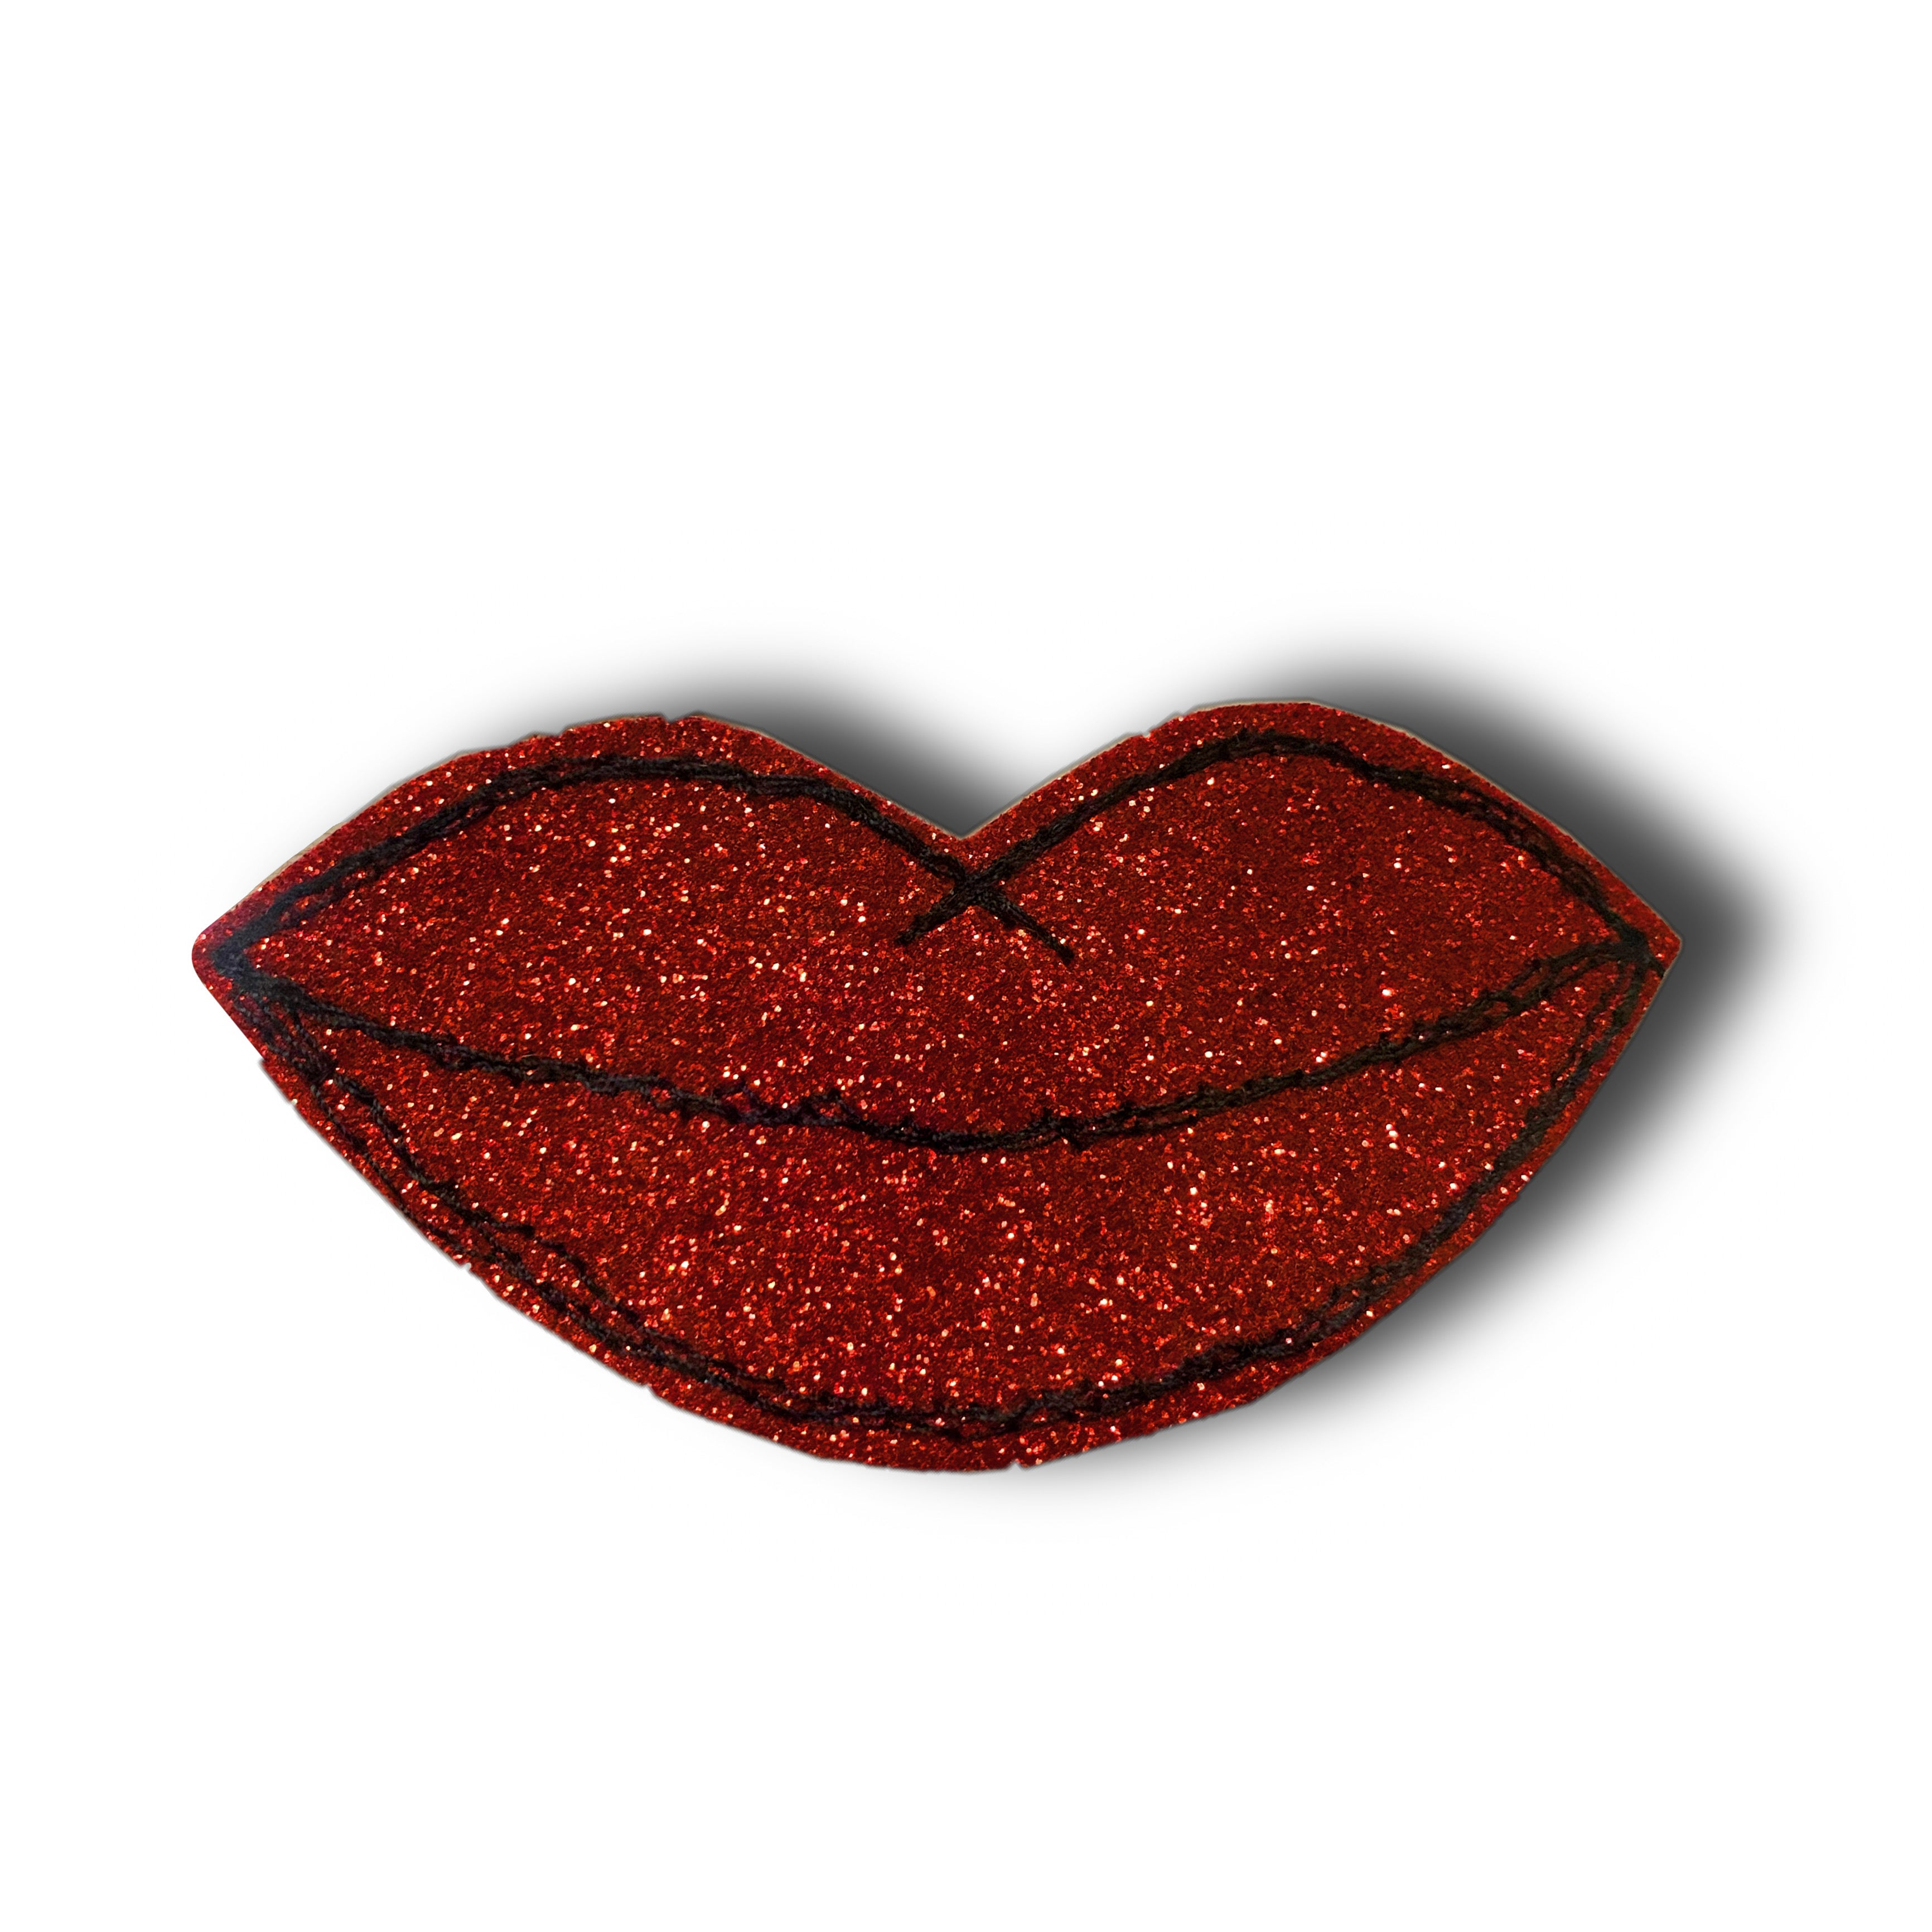 One of a Kind Lips Glitter Brooch / Badge - Bumblebee Design Treasures (Last Available)